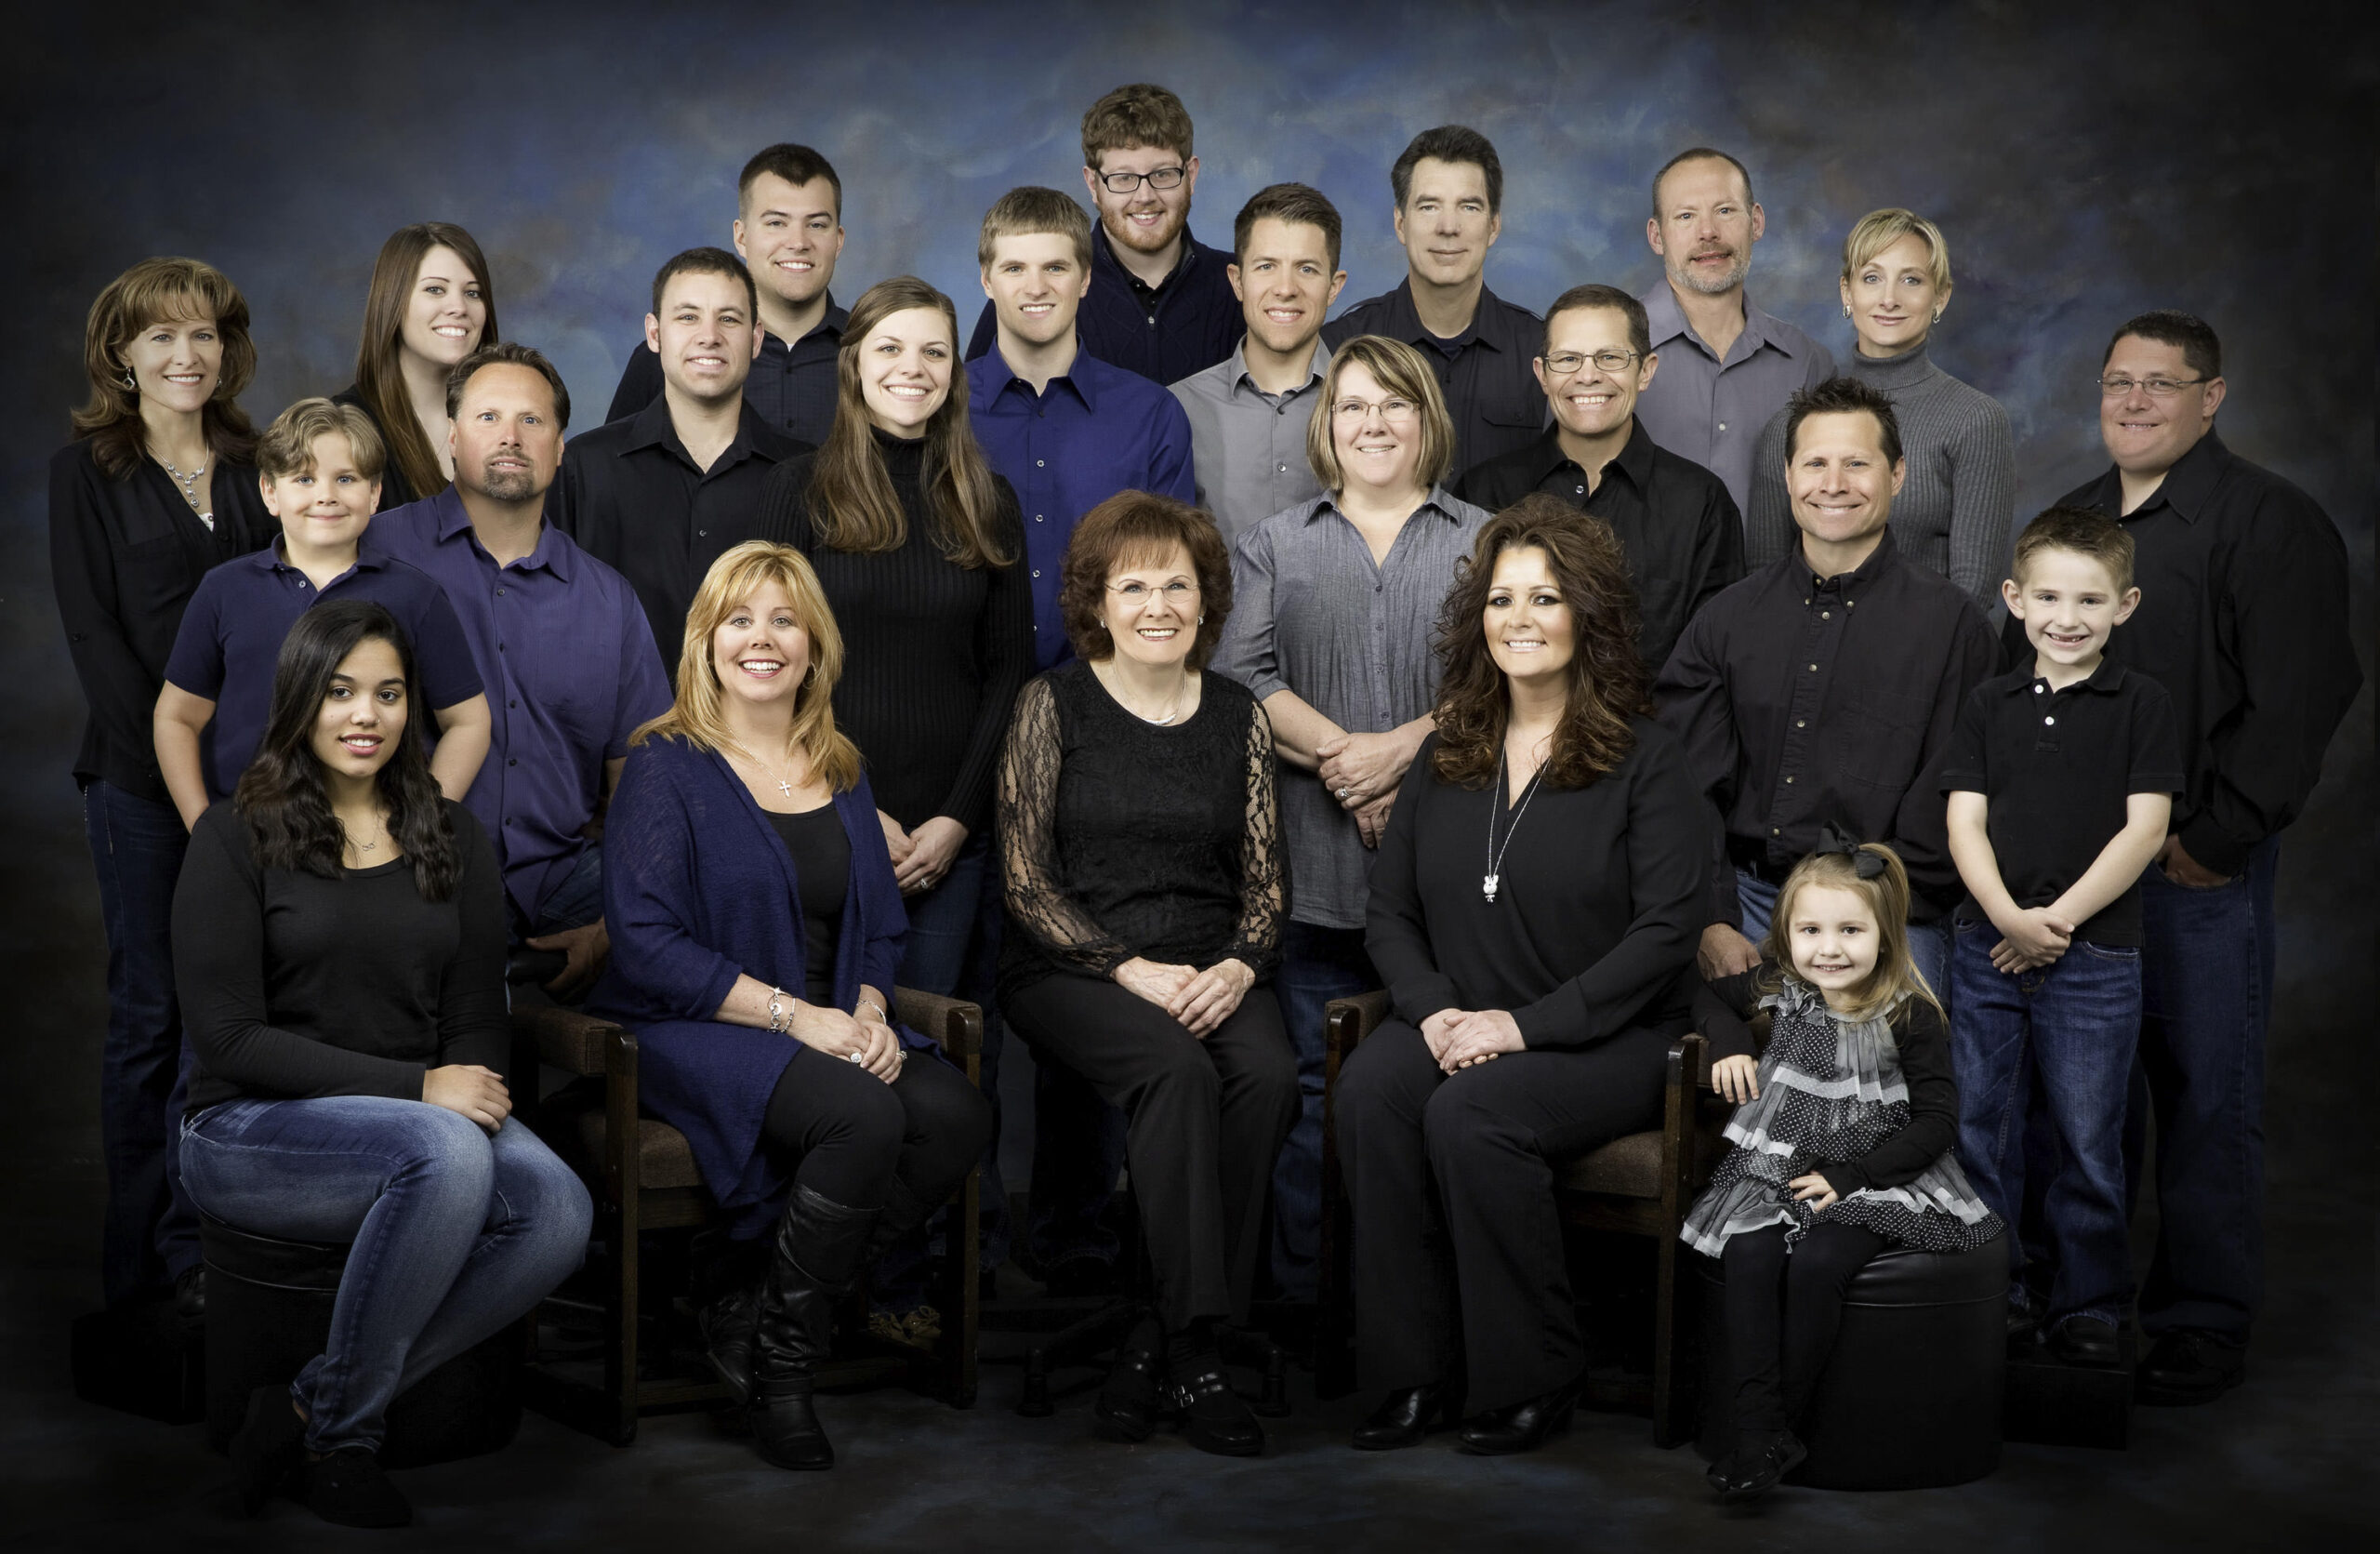 Families: A Sample of KenMar styles